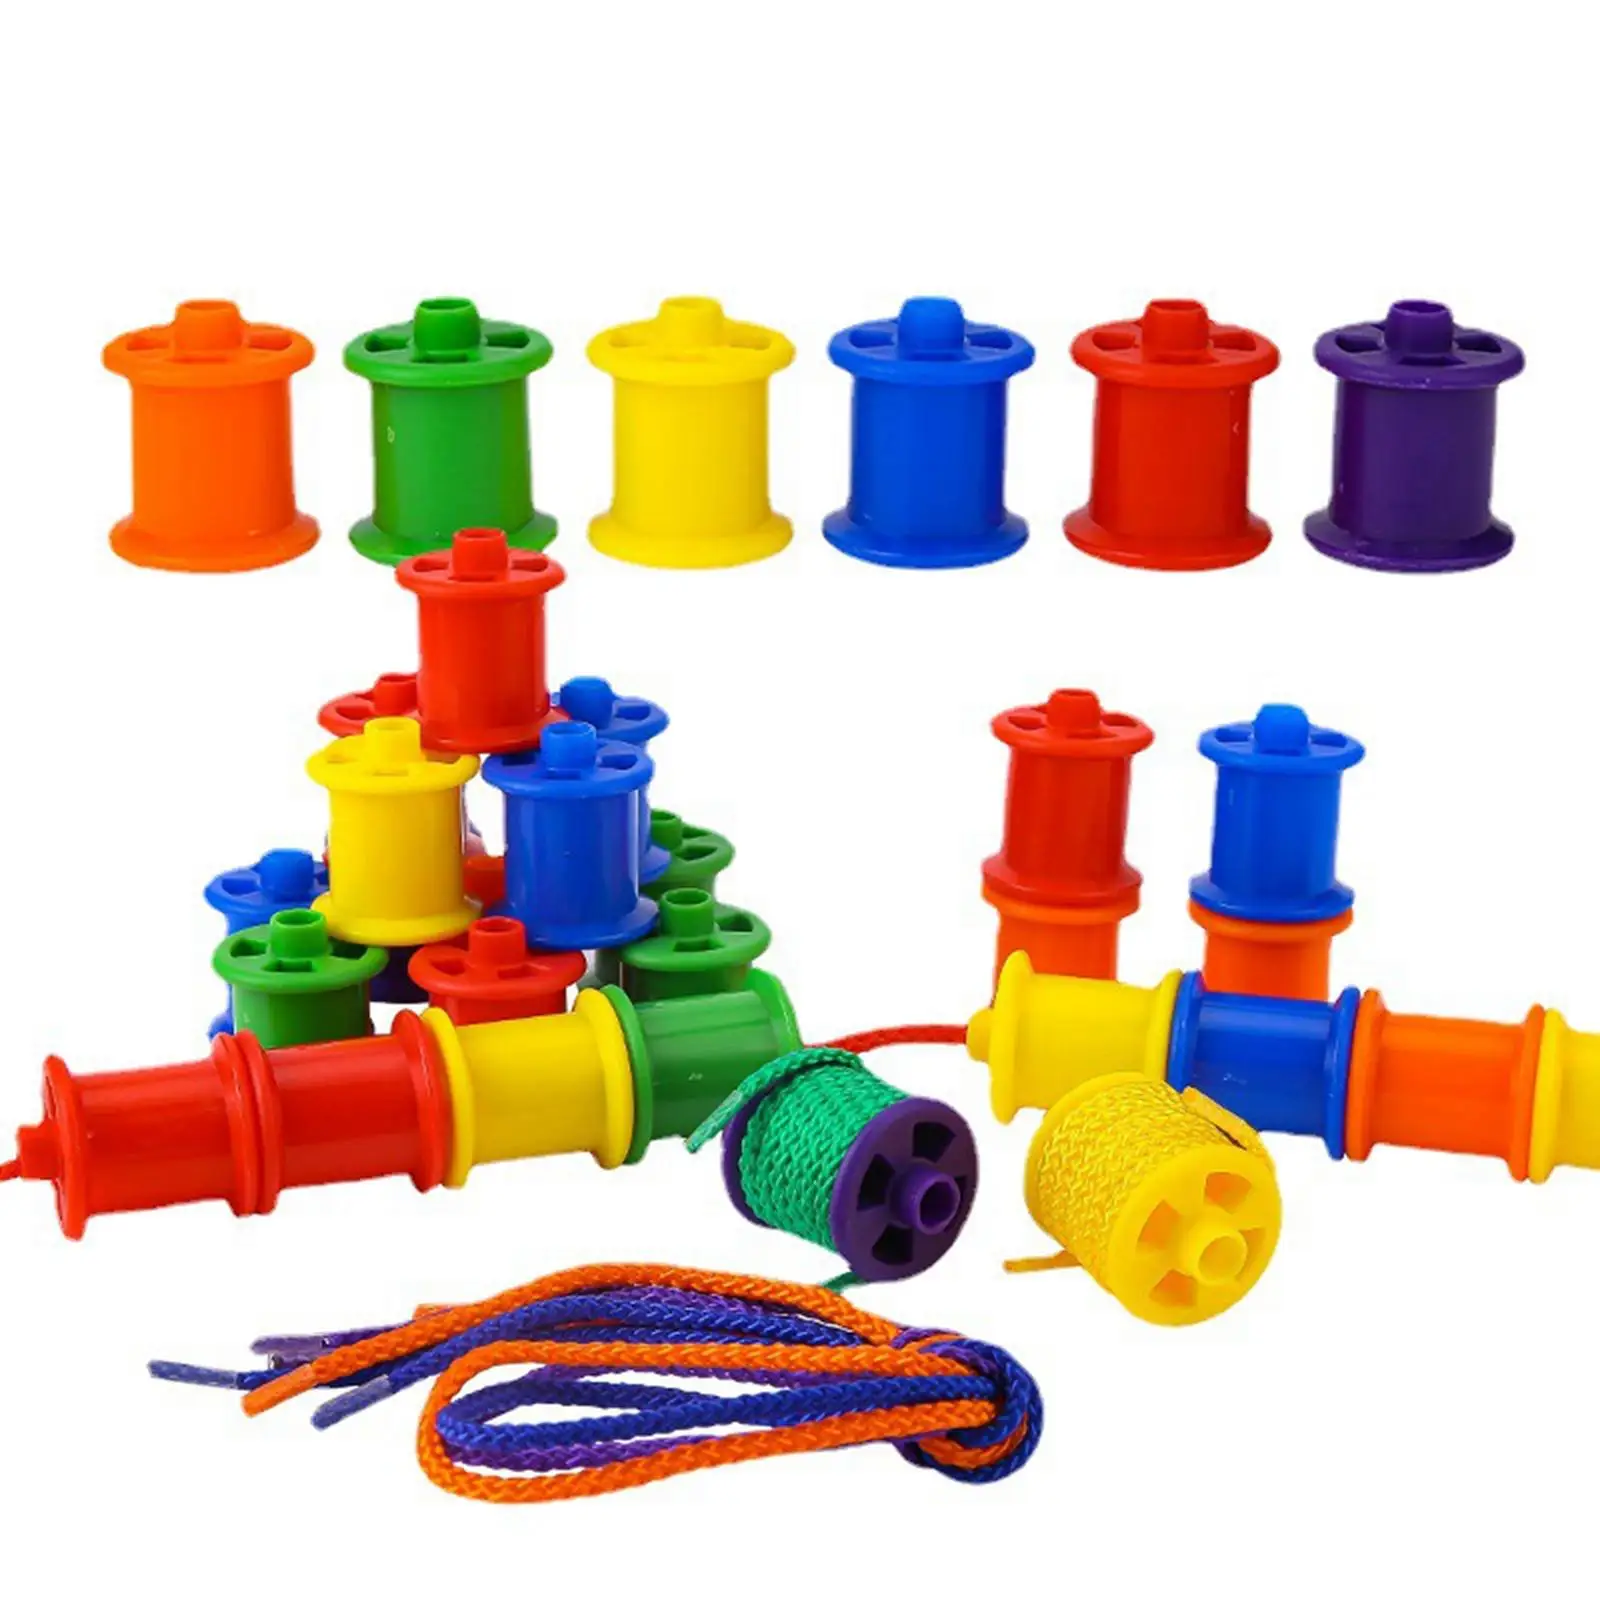 Lacing Beads Toy Party Favors Present for Kindergarten Learning Activities